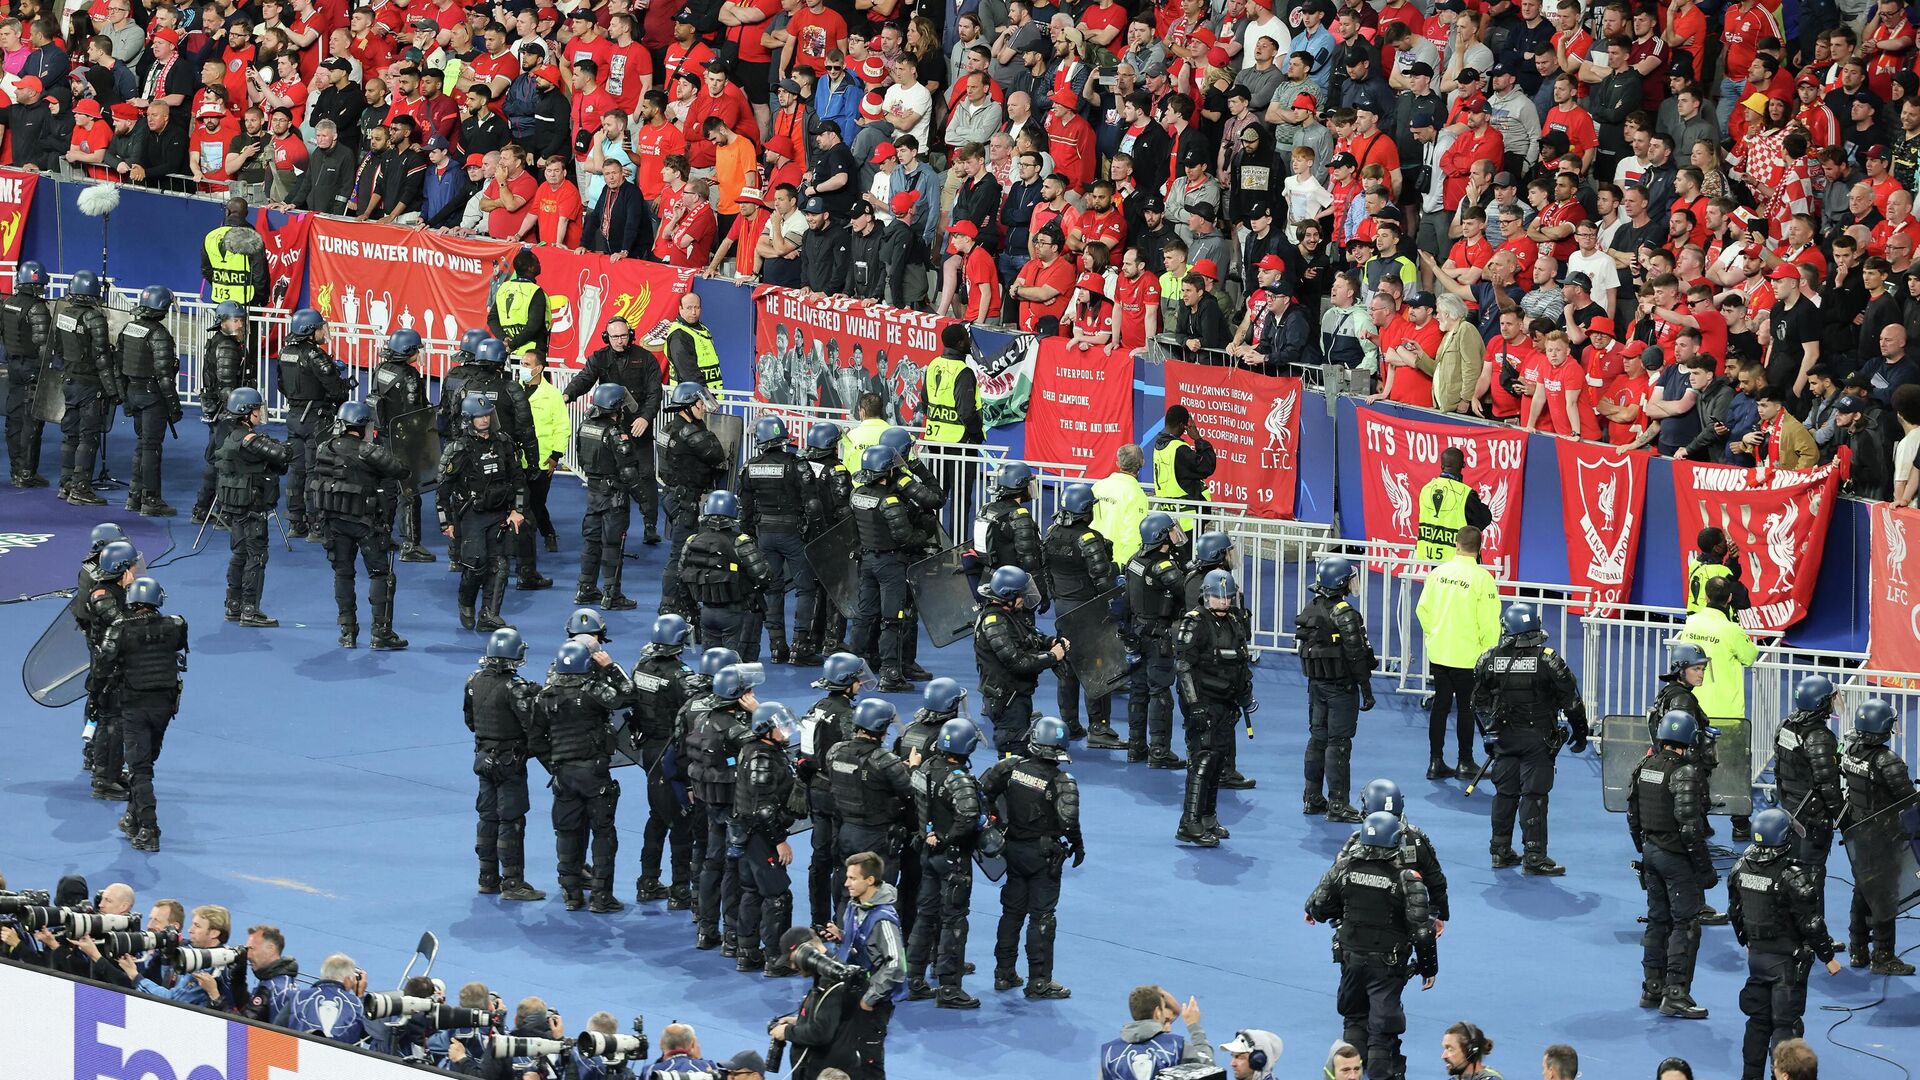 Riot police take up positions in front of the Liverpool fans after the UEFA Champions League final football match between Liverpool and Real Madrid at the Stade de France in Saint-Denis, north of Paris, on May 28, 2022. - Sputnik International, 1920, 29.05.2022